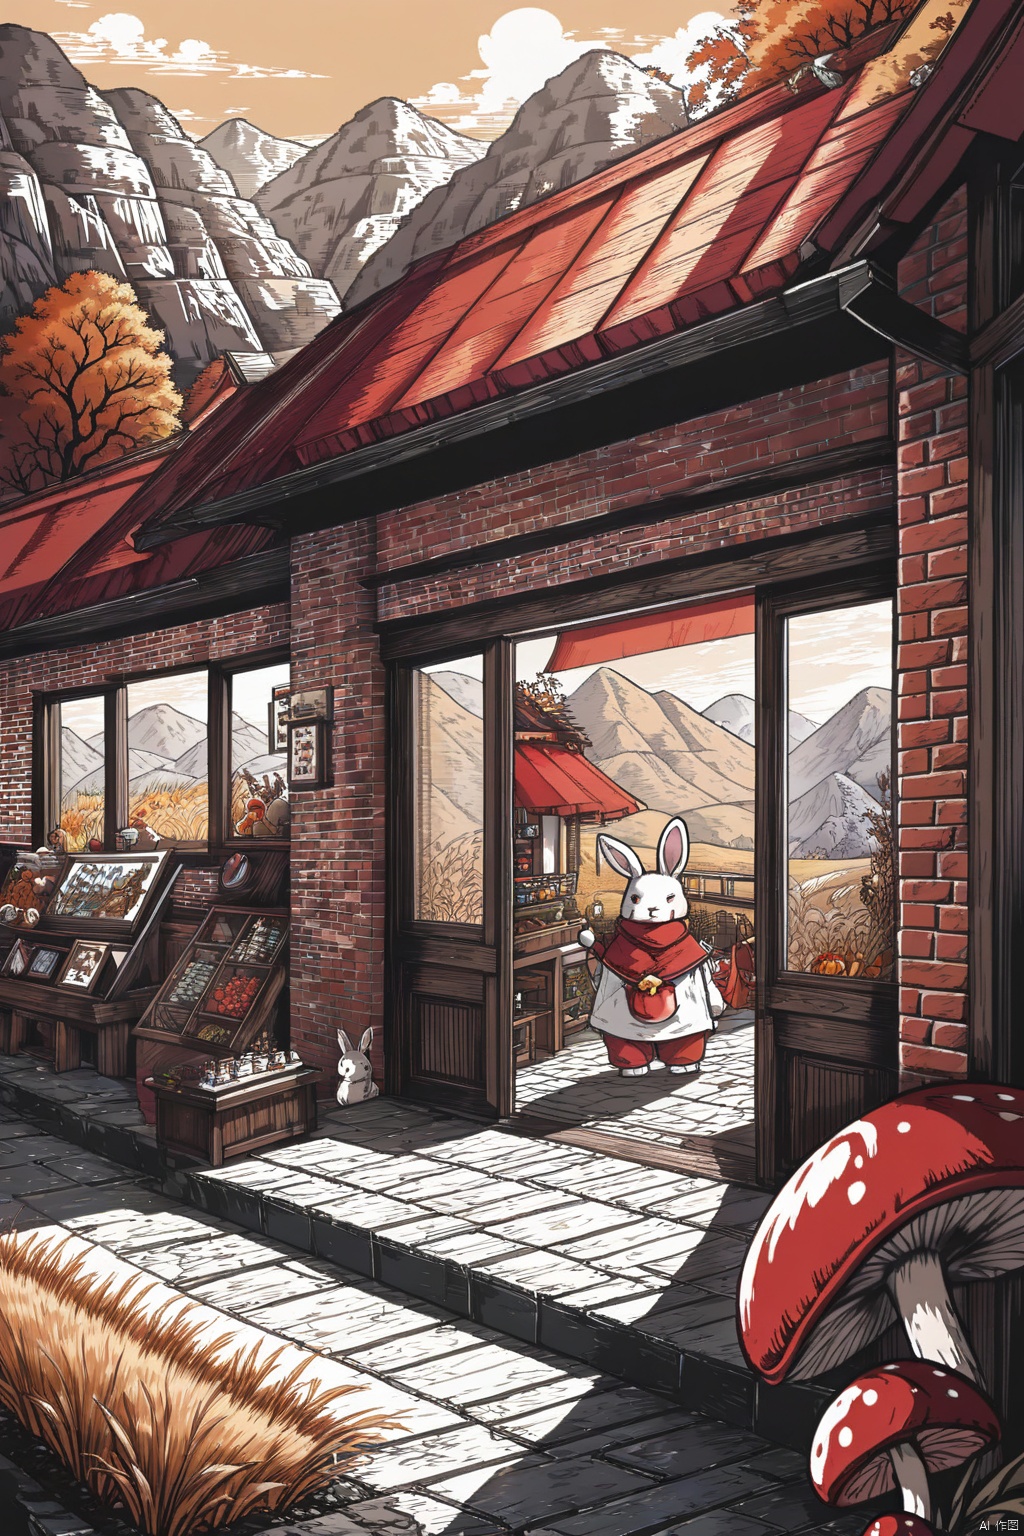 line art,line style,One Rabbit characters stand at the entrance of the shop,Rabbit in Clothes,Glass Window,Brick Wall,In the distance is a mountain,The sun horn from left to right,shop,sunshade,highly detailed digital painting,Autumn,Wheat Field,River,A house shaped  a red topped mushroom,